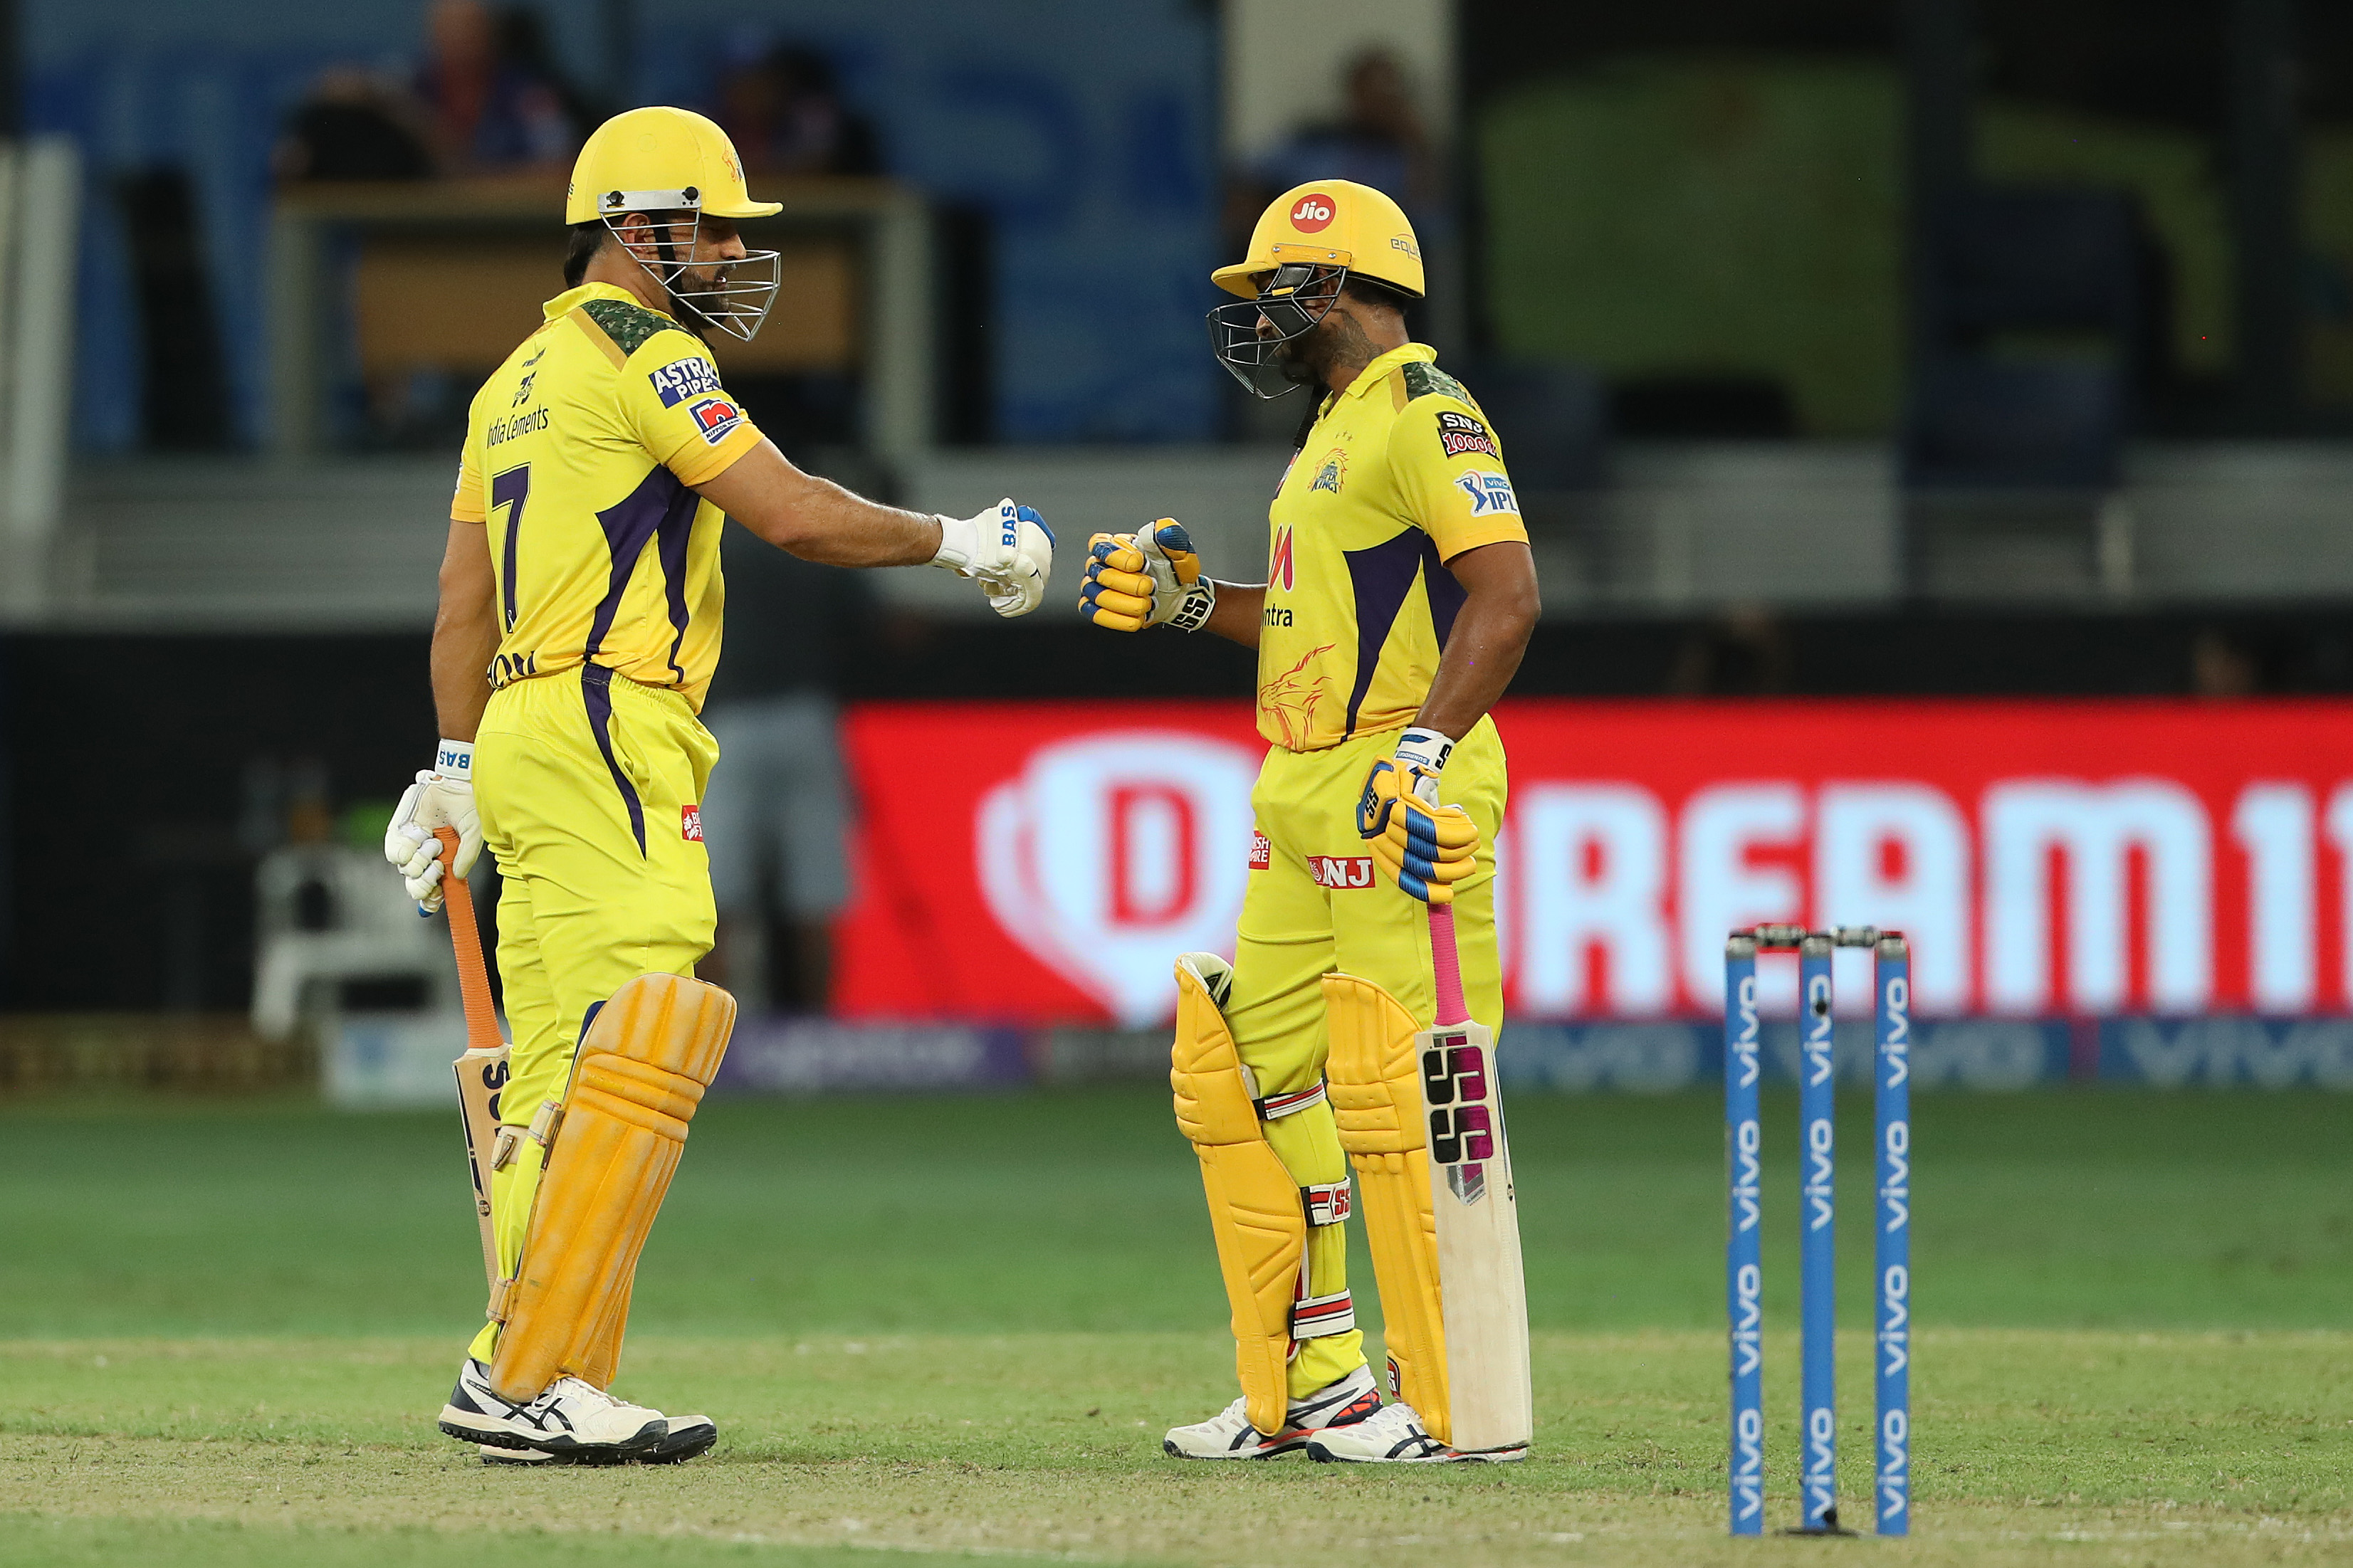 Dhoni reveals turning point of the match after CSK loss against DC